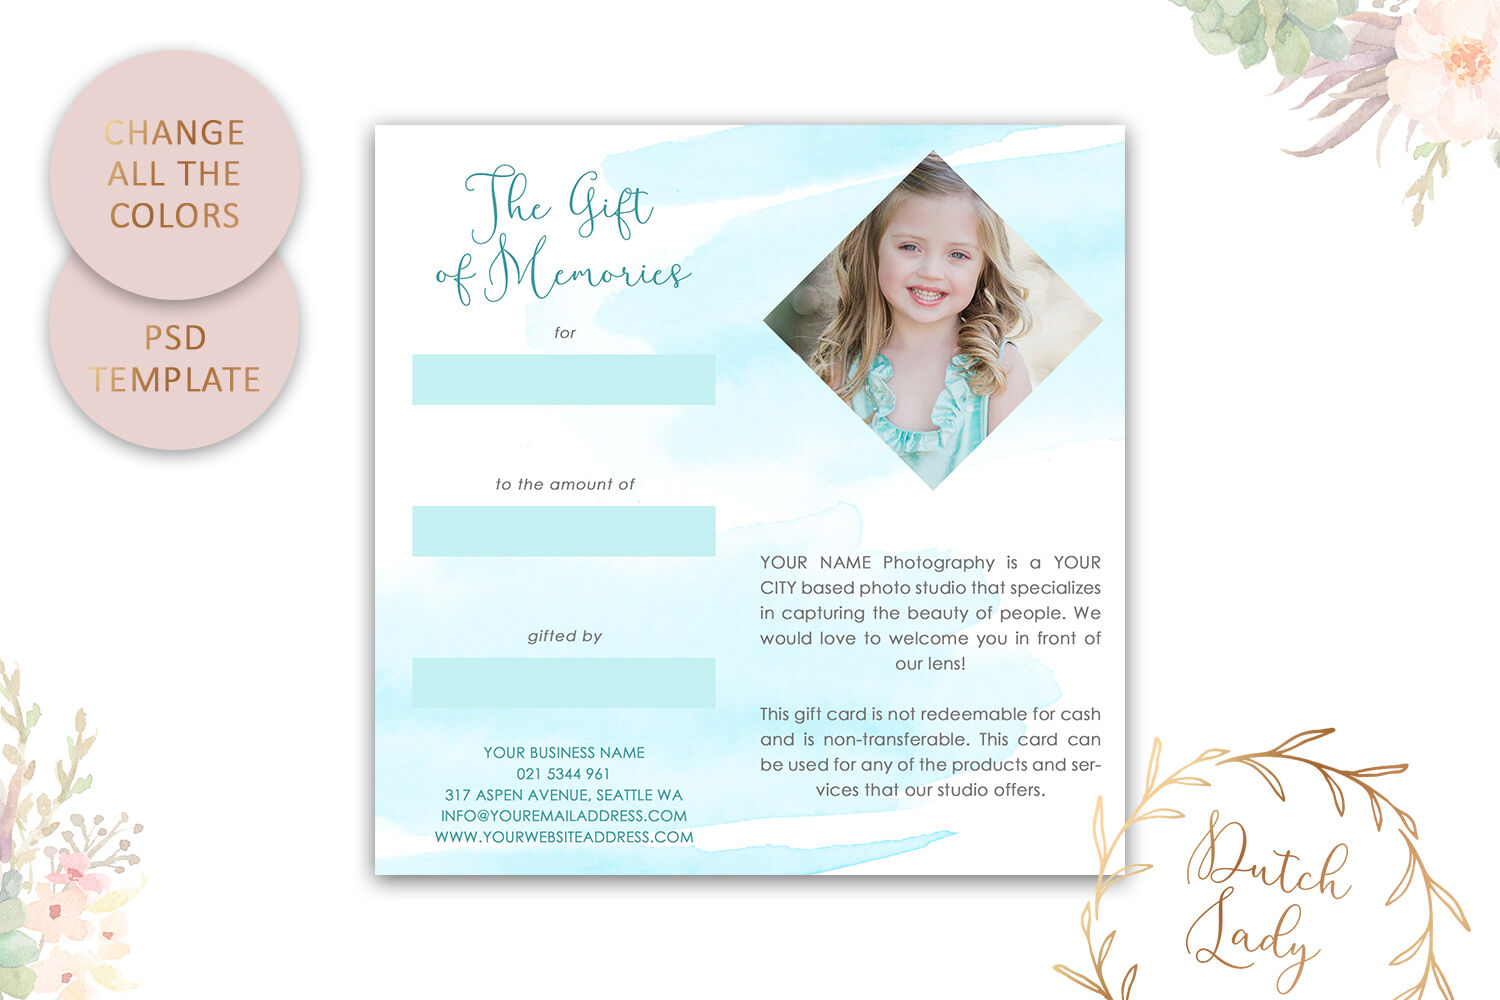 PSD Photo Gift Card Template #41 By The Dutch Lady Designs